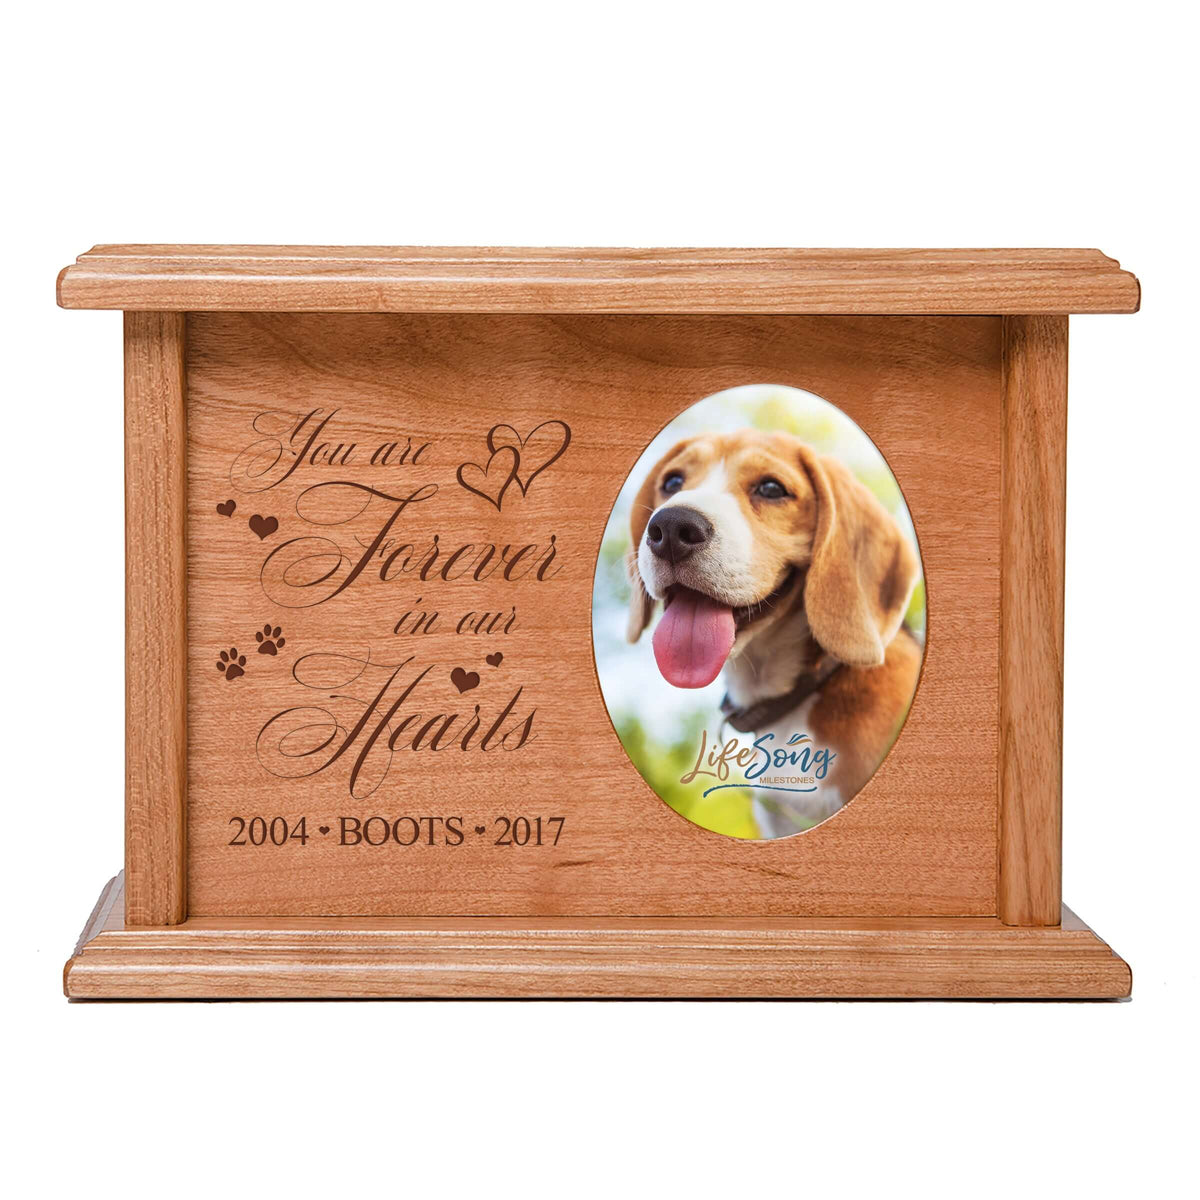 Pet Memorial Picture Cremation Urn Box for Dog or Cat - You Are Forever In Our Hearts